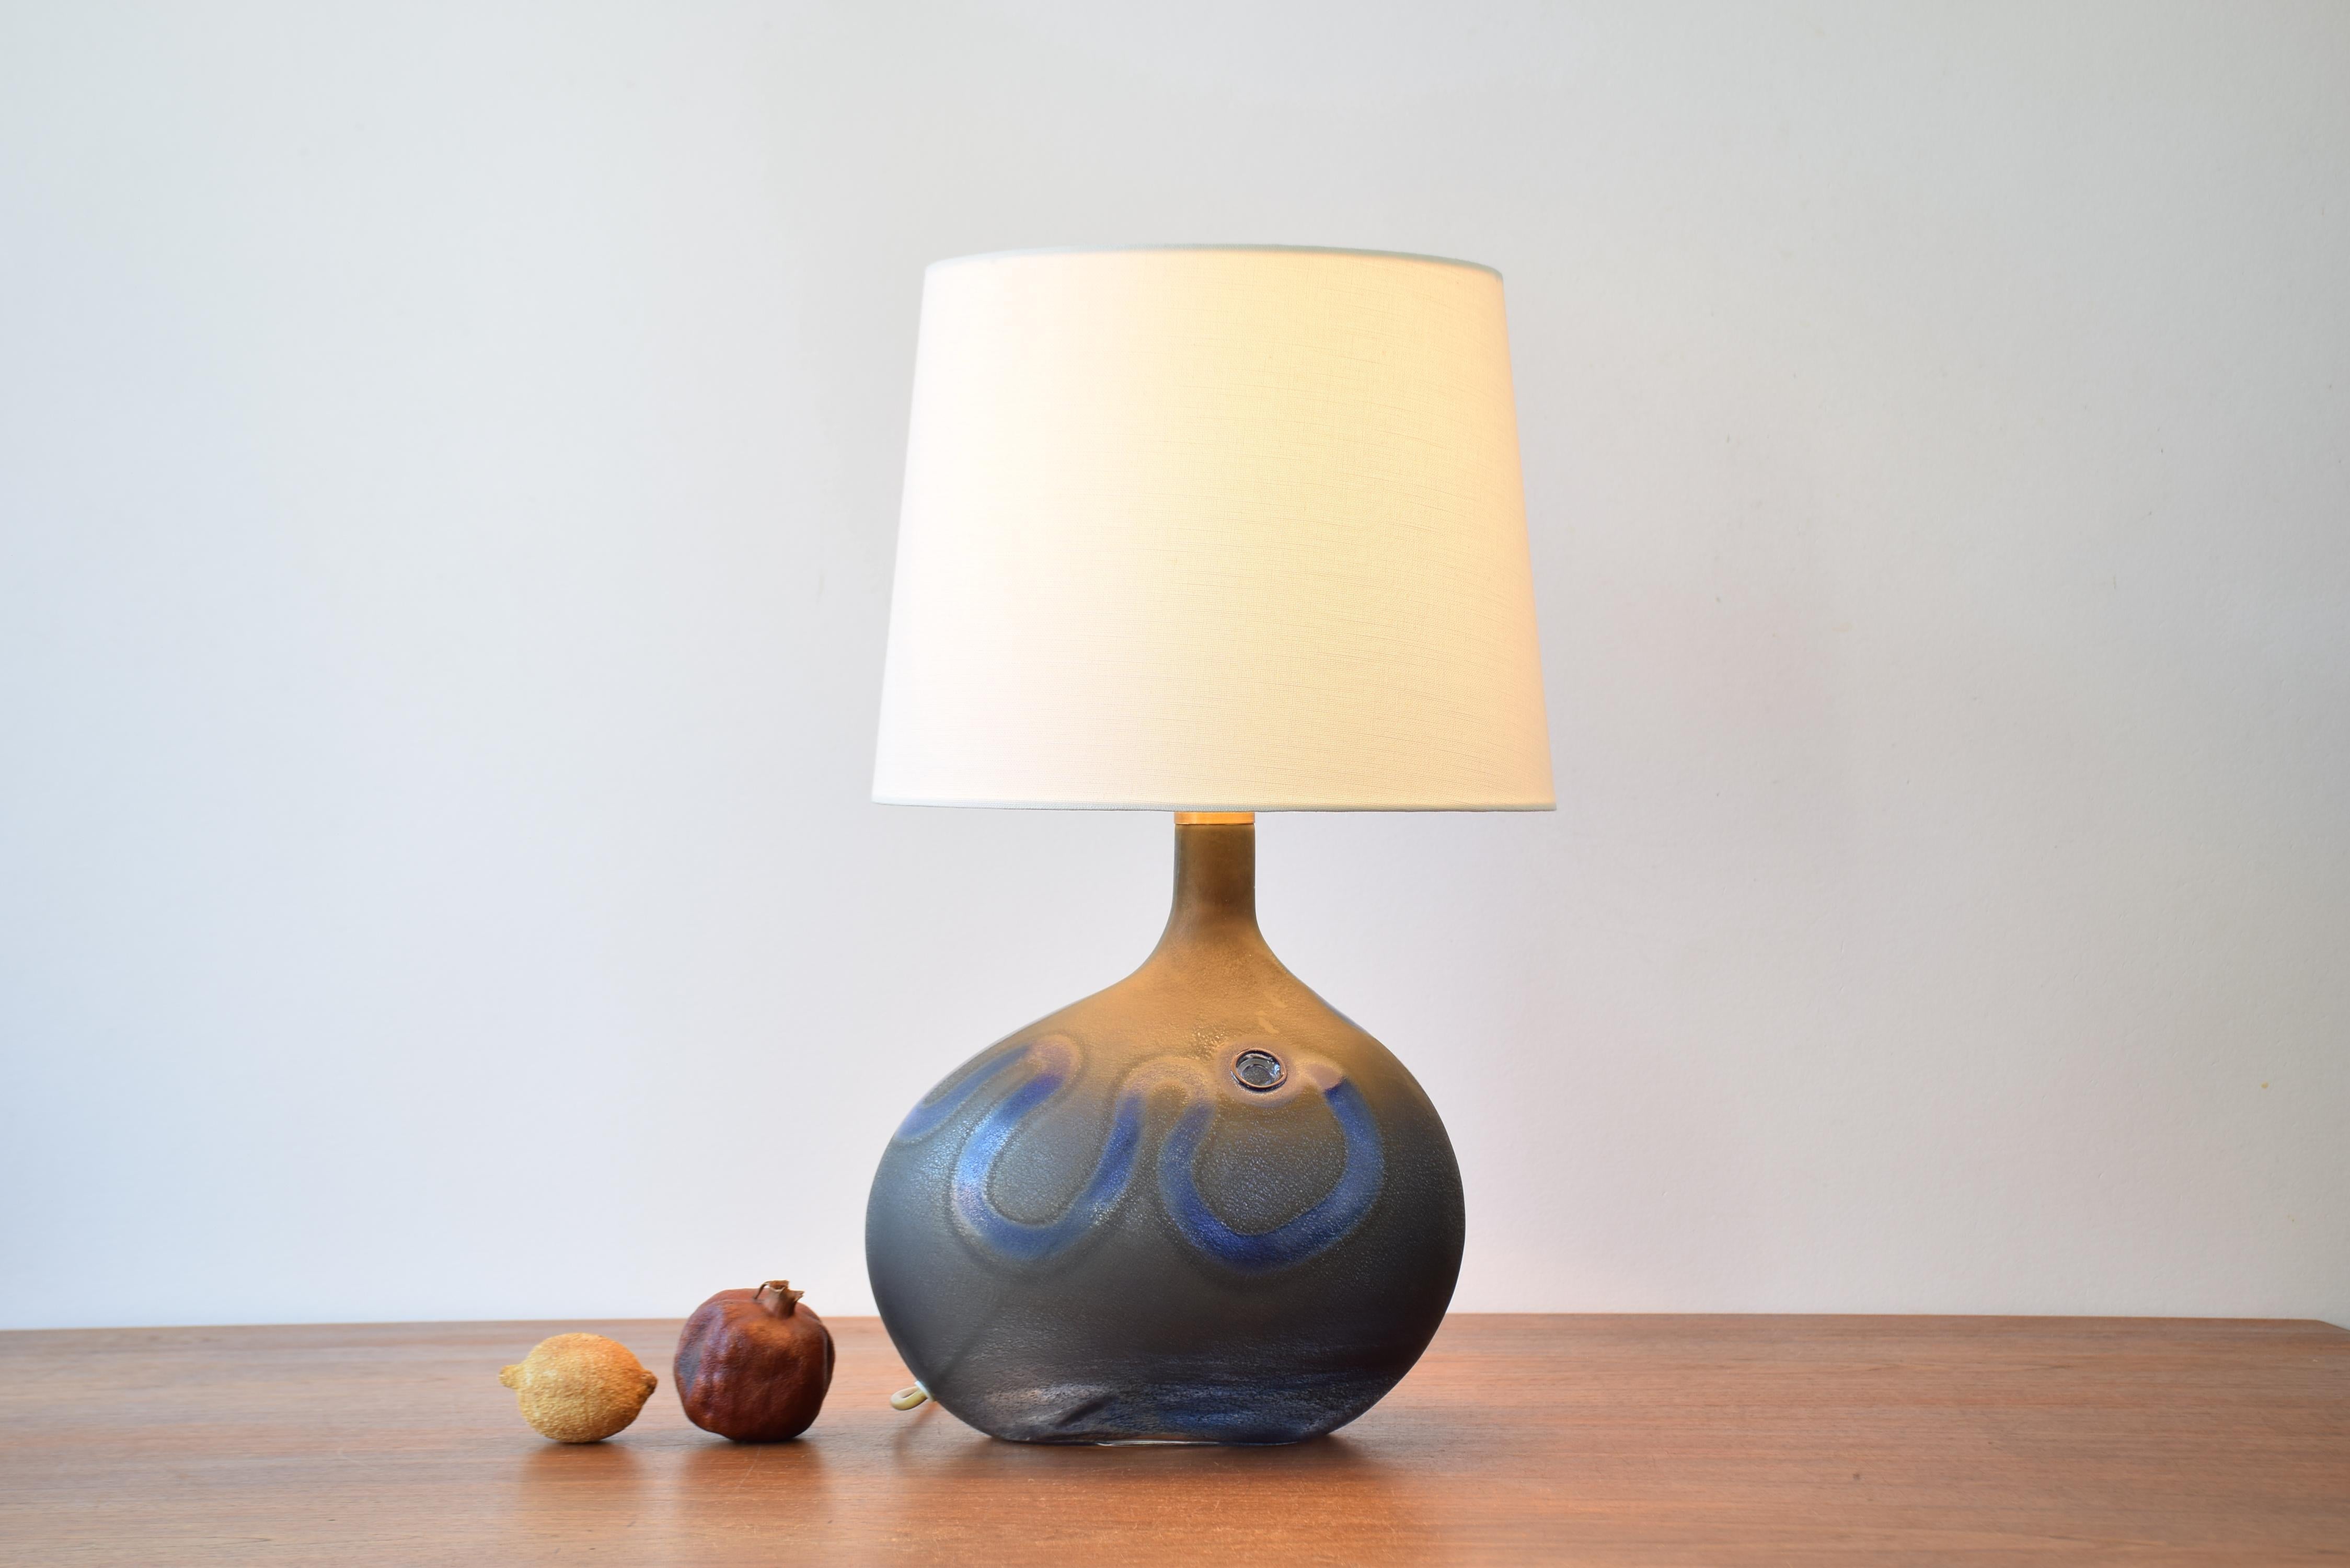 Michael Bang for Holmegaard Large Midnight Blue Sculptural Glass Table Lamp 1970 In Good Condition For Sale In Aarhus C, DK